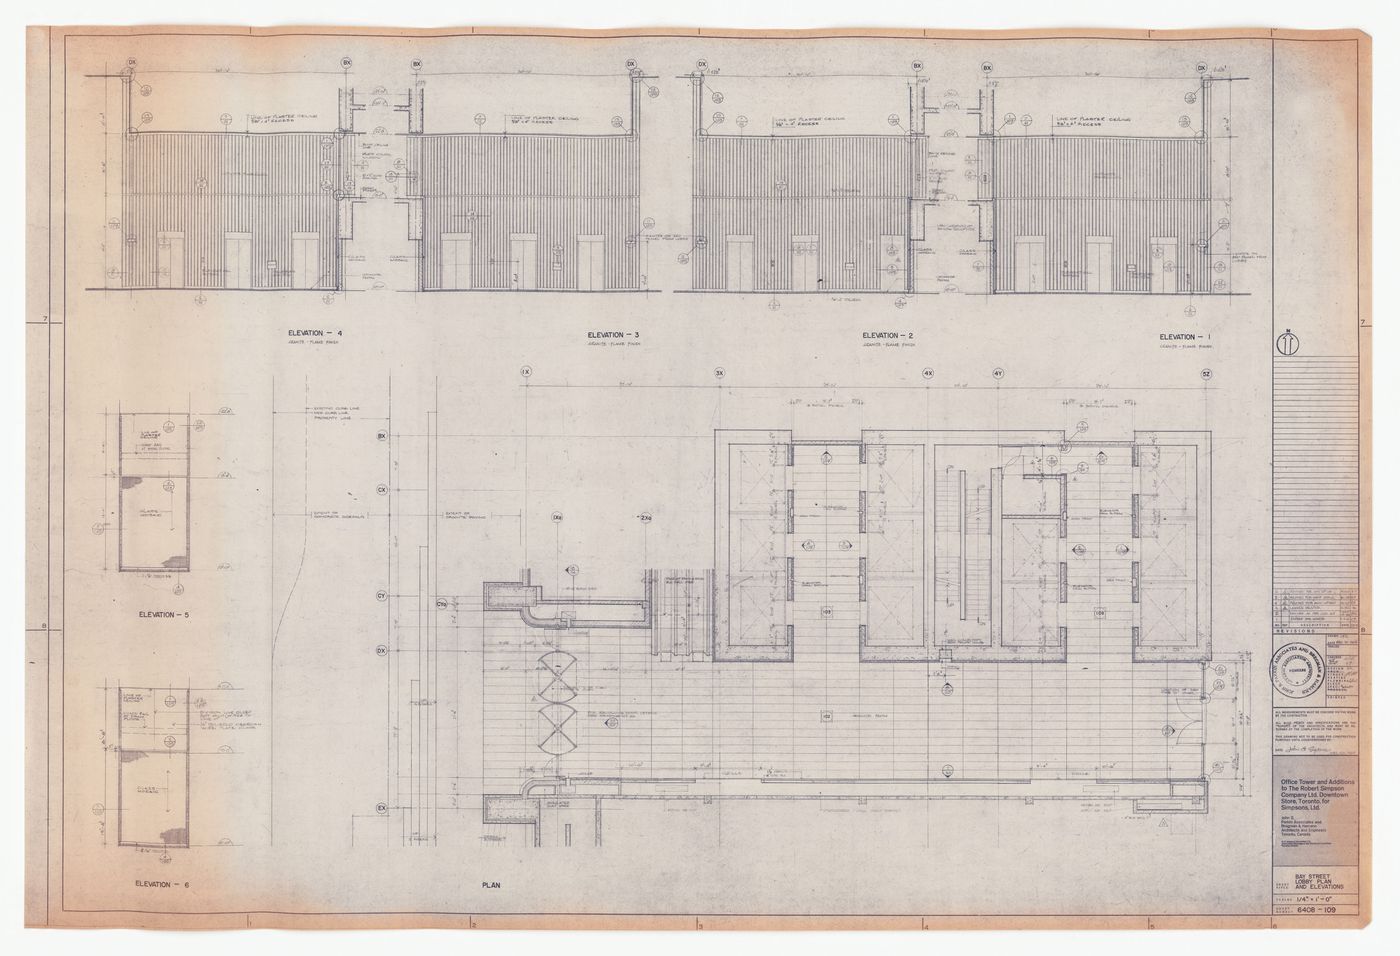 Bay Street lobby plan and elevations for construction for The Robert Simpson Company Limited Downtown Store, Office Tower and Additions, Toronto